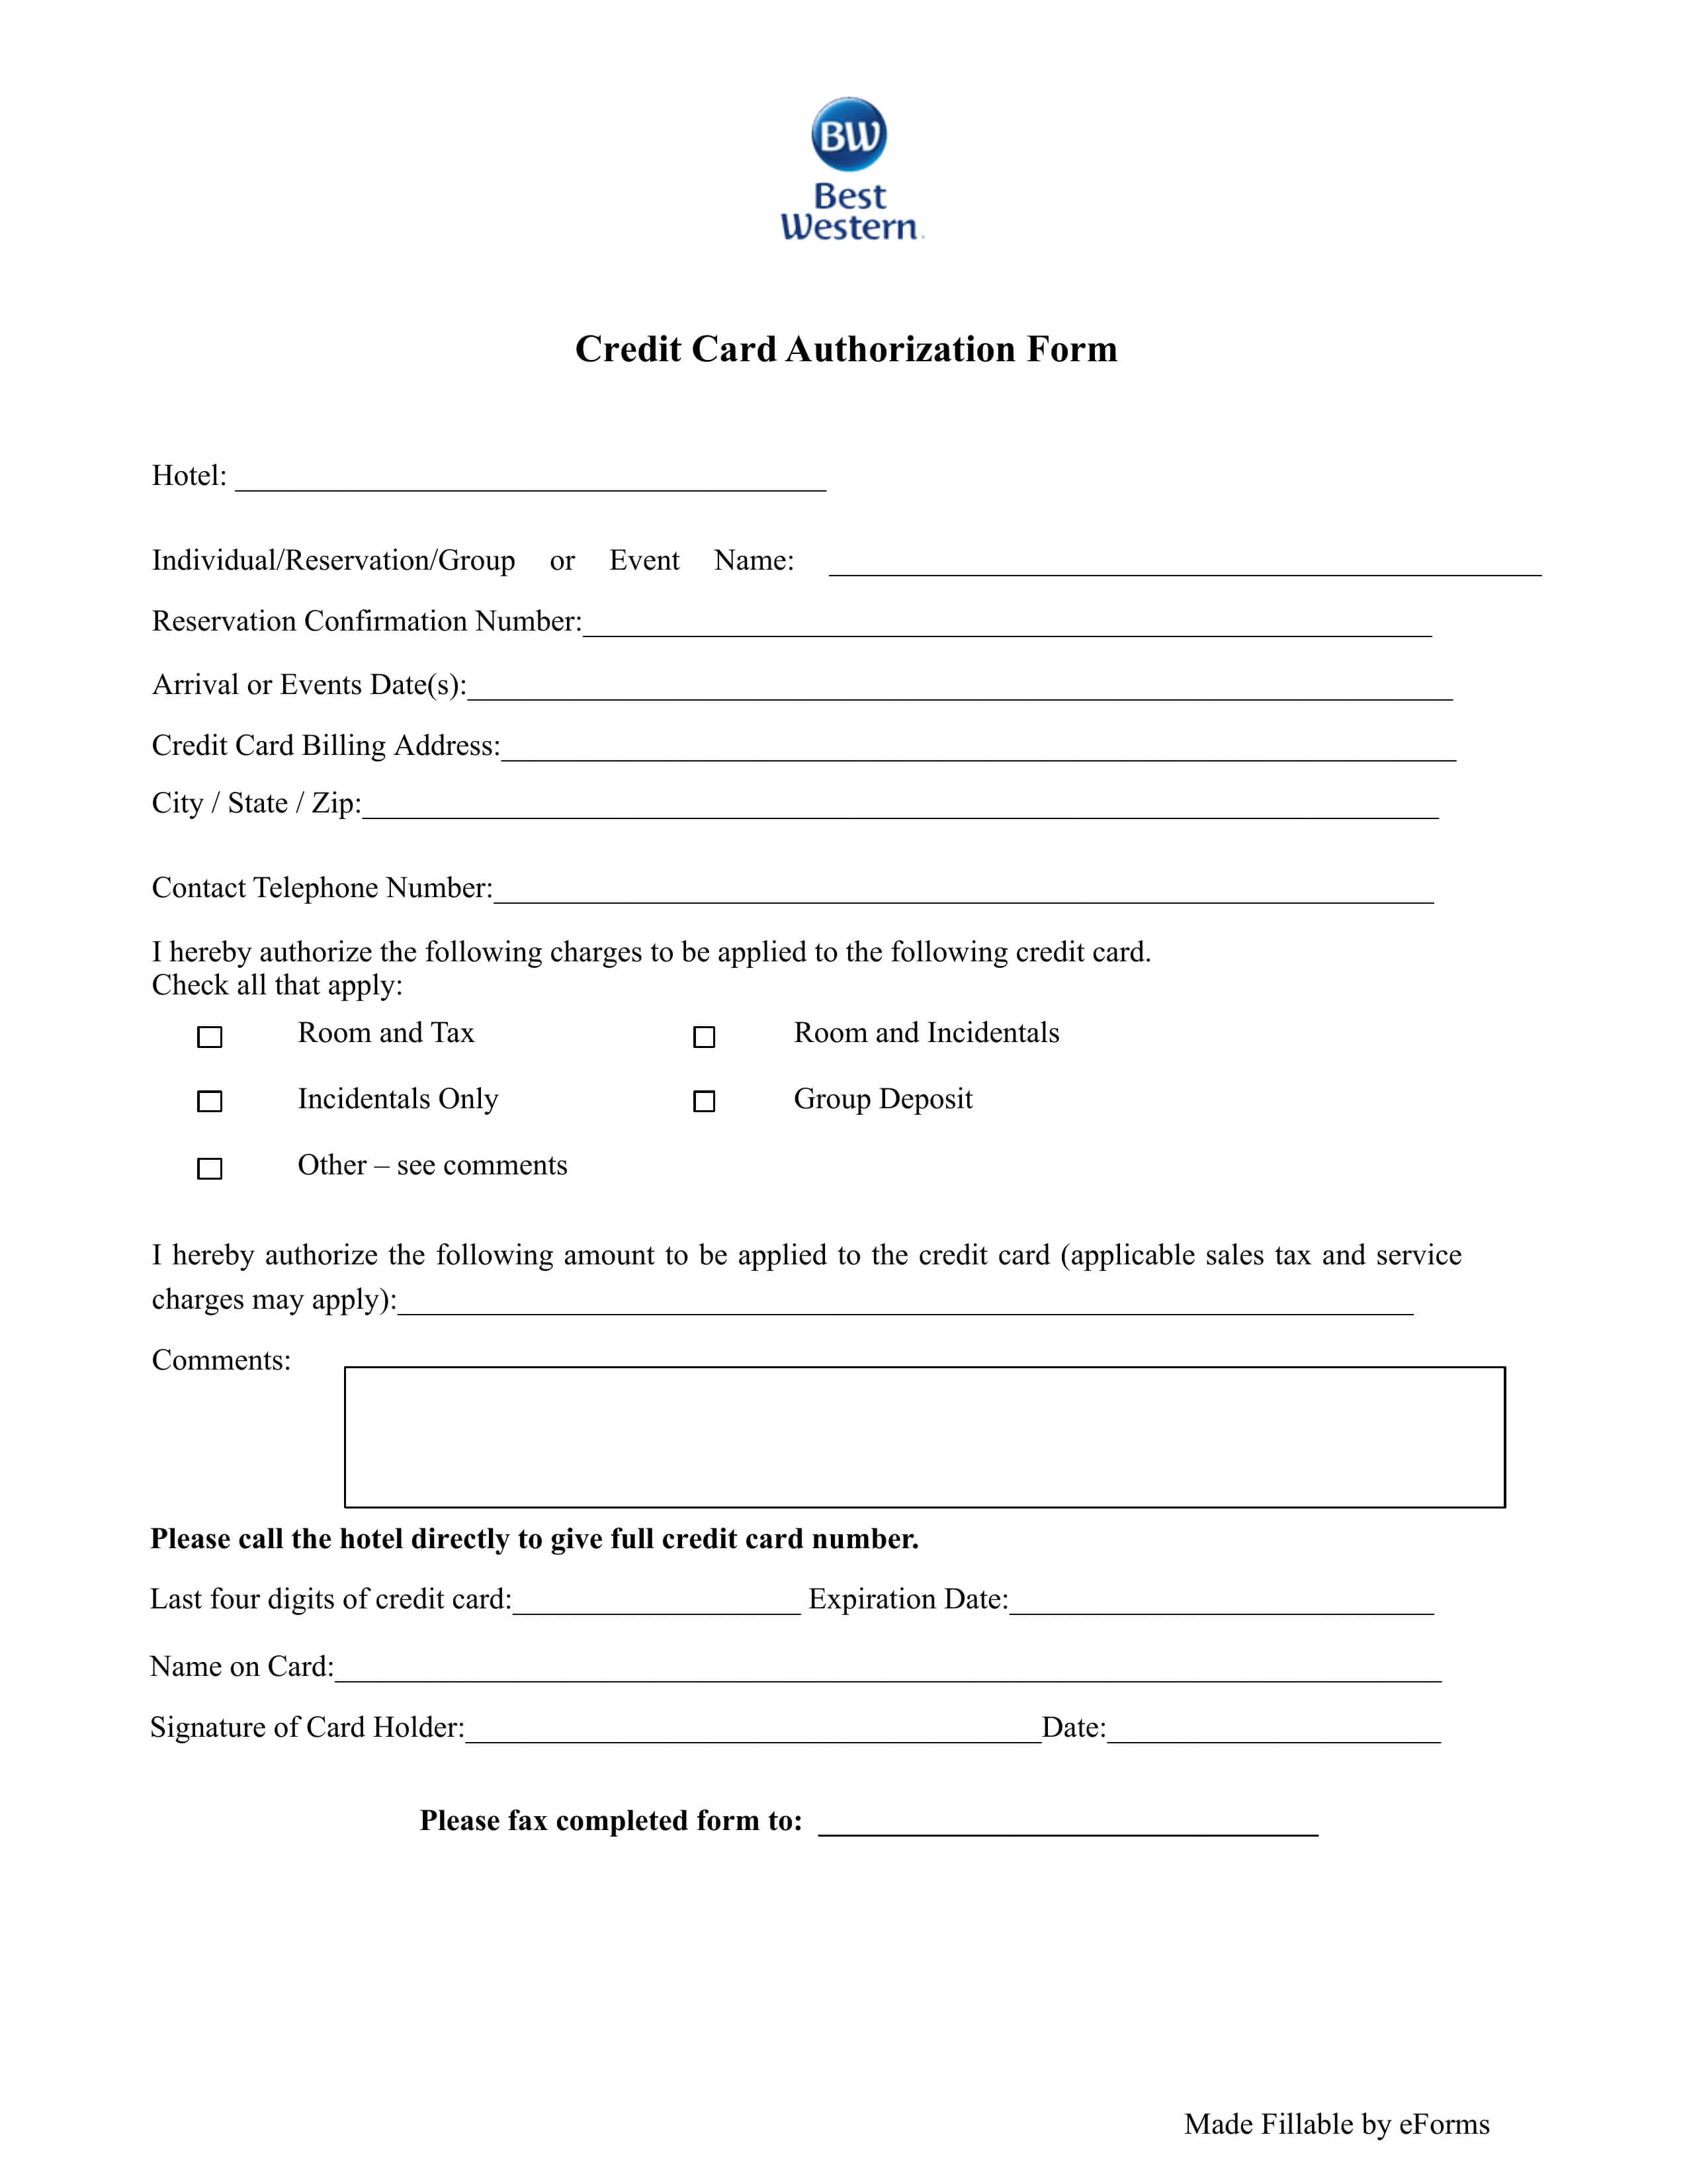 015 Template Ideas Credit Card Authorization Form Best Intended For Hotel Credit Card Authorization Form Template